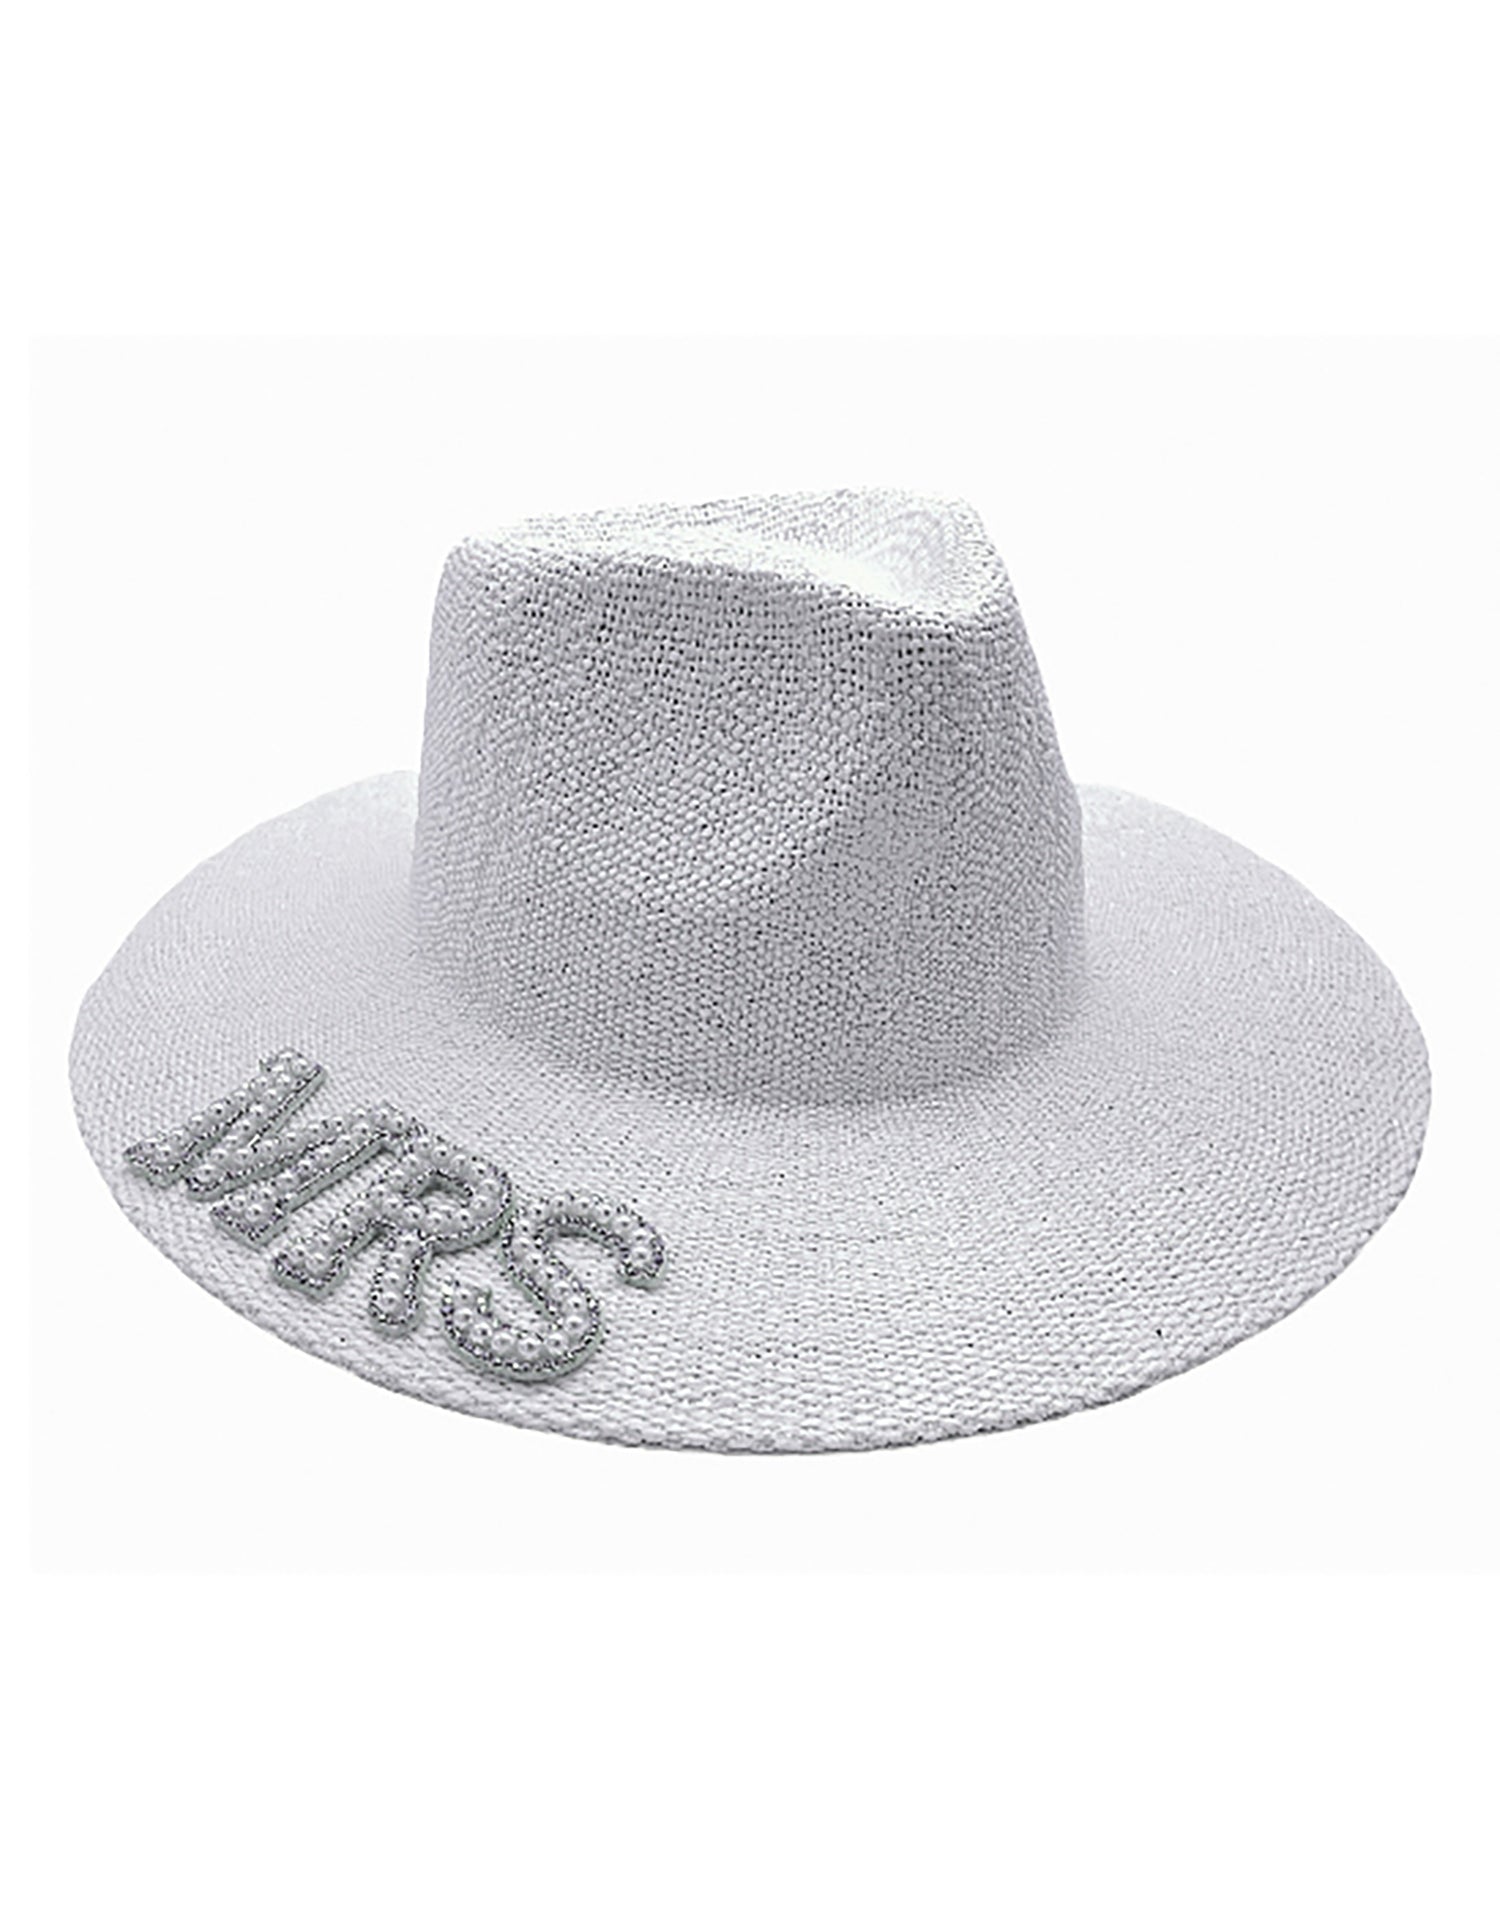 MRS Straw Hat by Nikki Beach in White - Product View